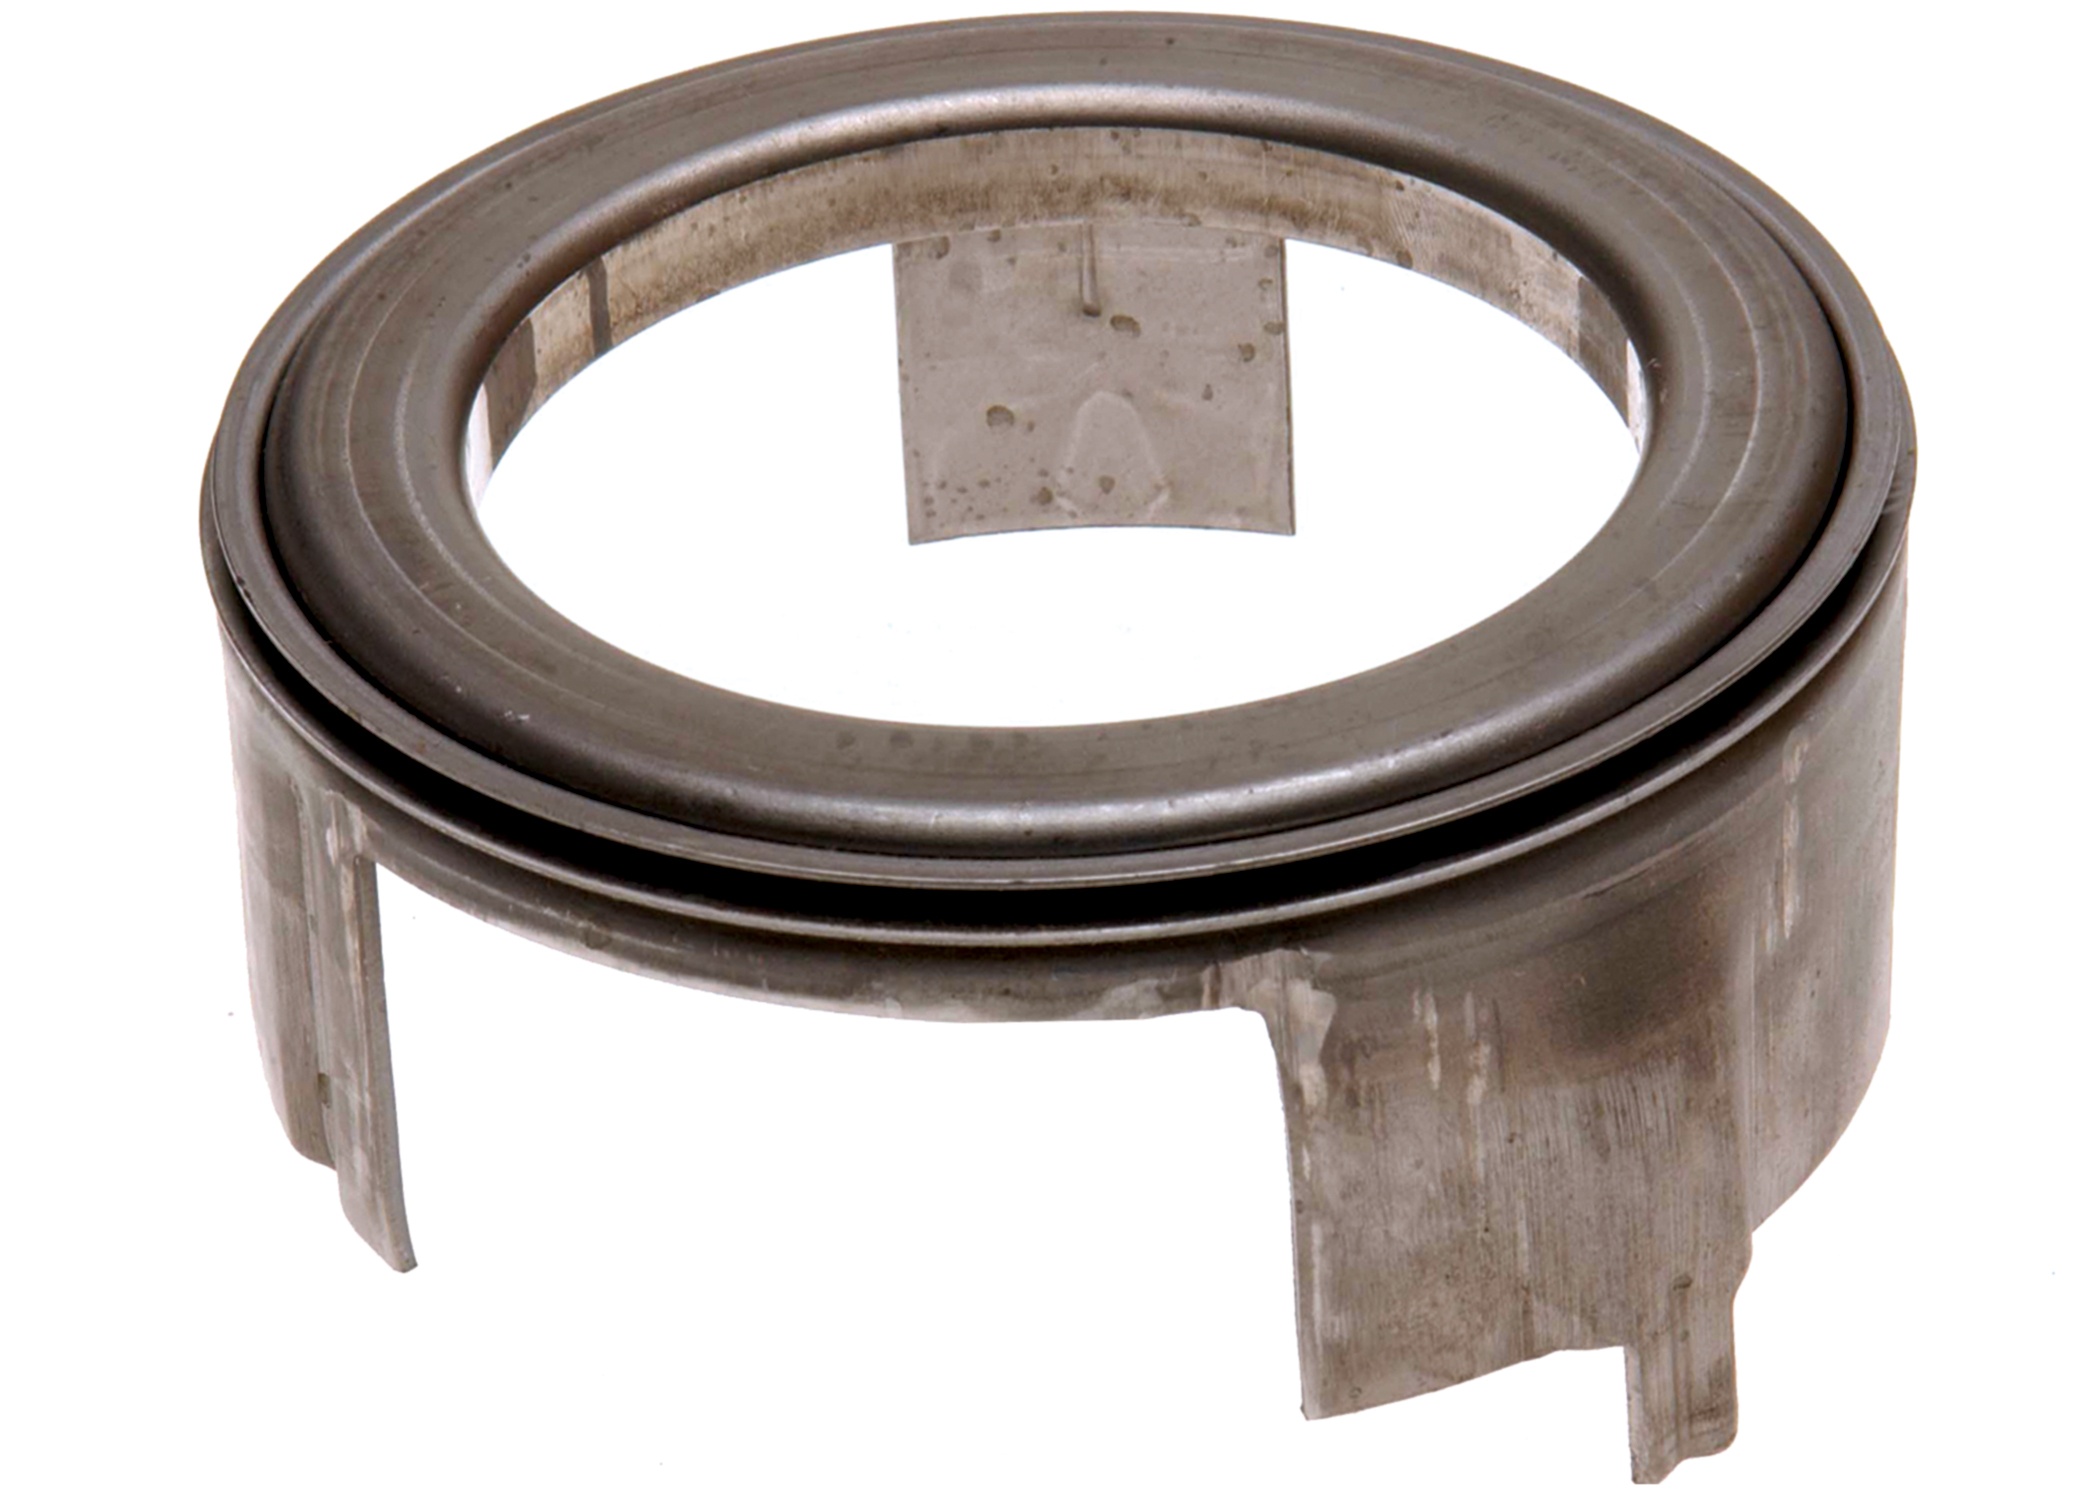 ACDELCO GM ORIGINAL EQUIPMENT - Automatic Transmission Clutch Pack Piston (4th) - DCB 24208560